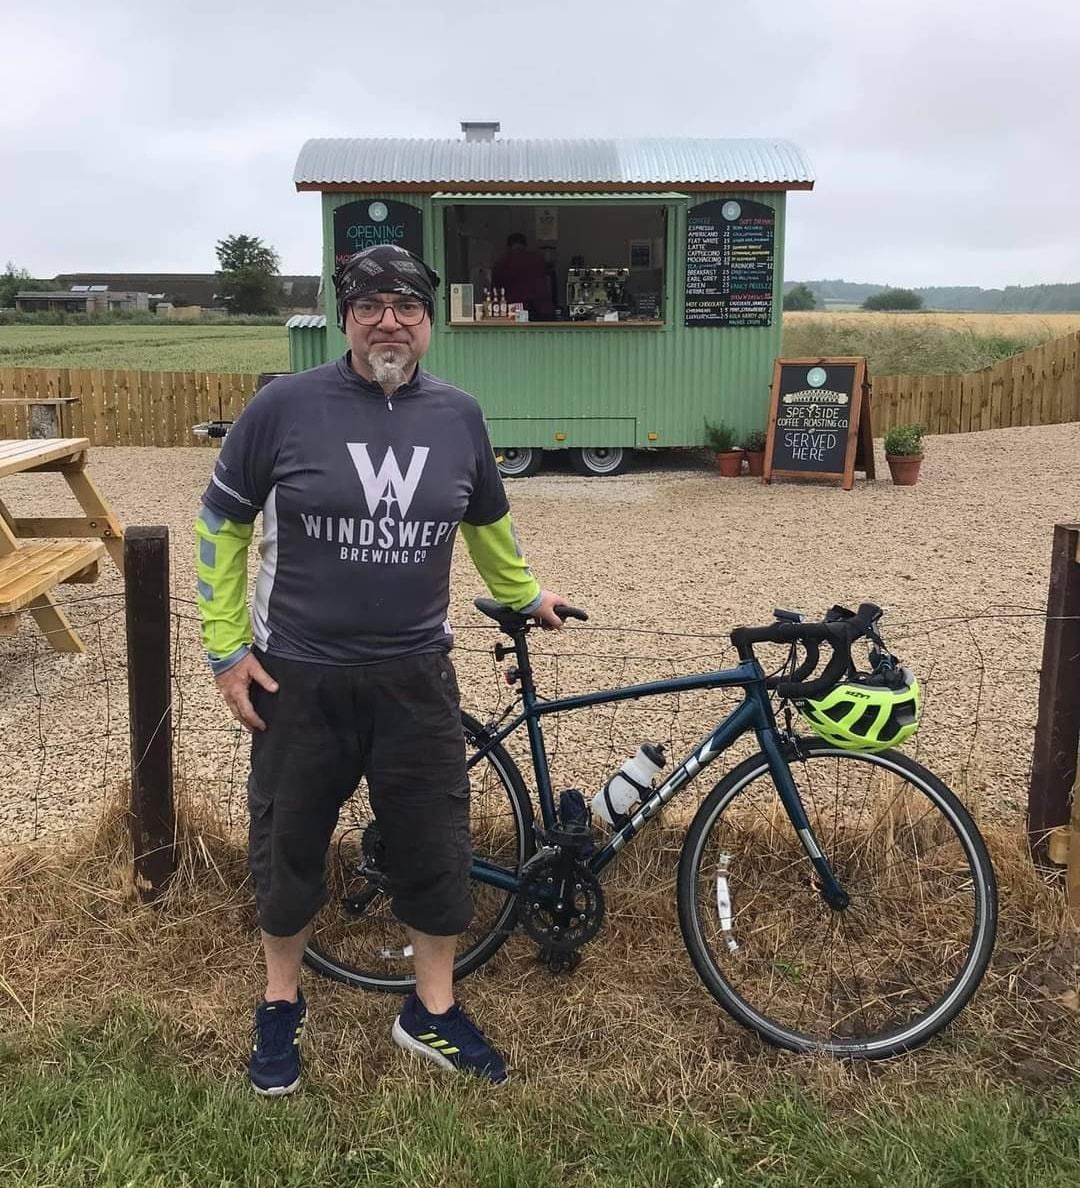 Stuart Evans cycled more than 800 miles as part of the challenge.